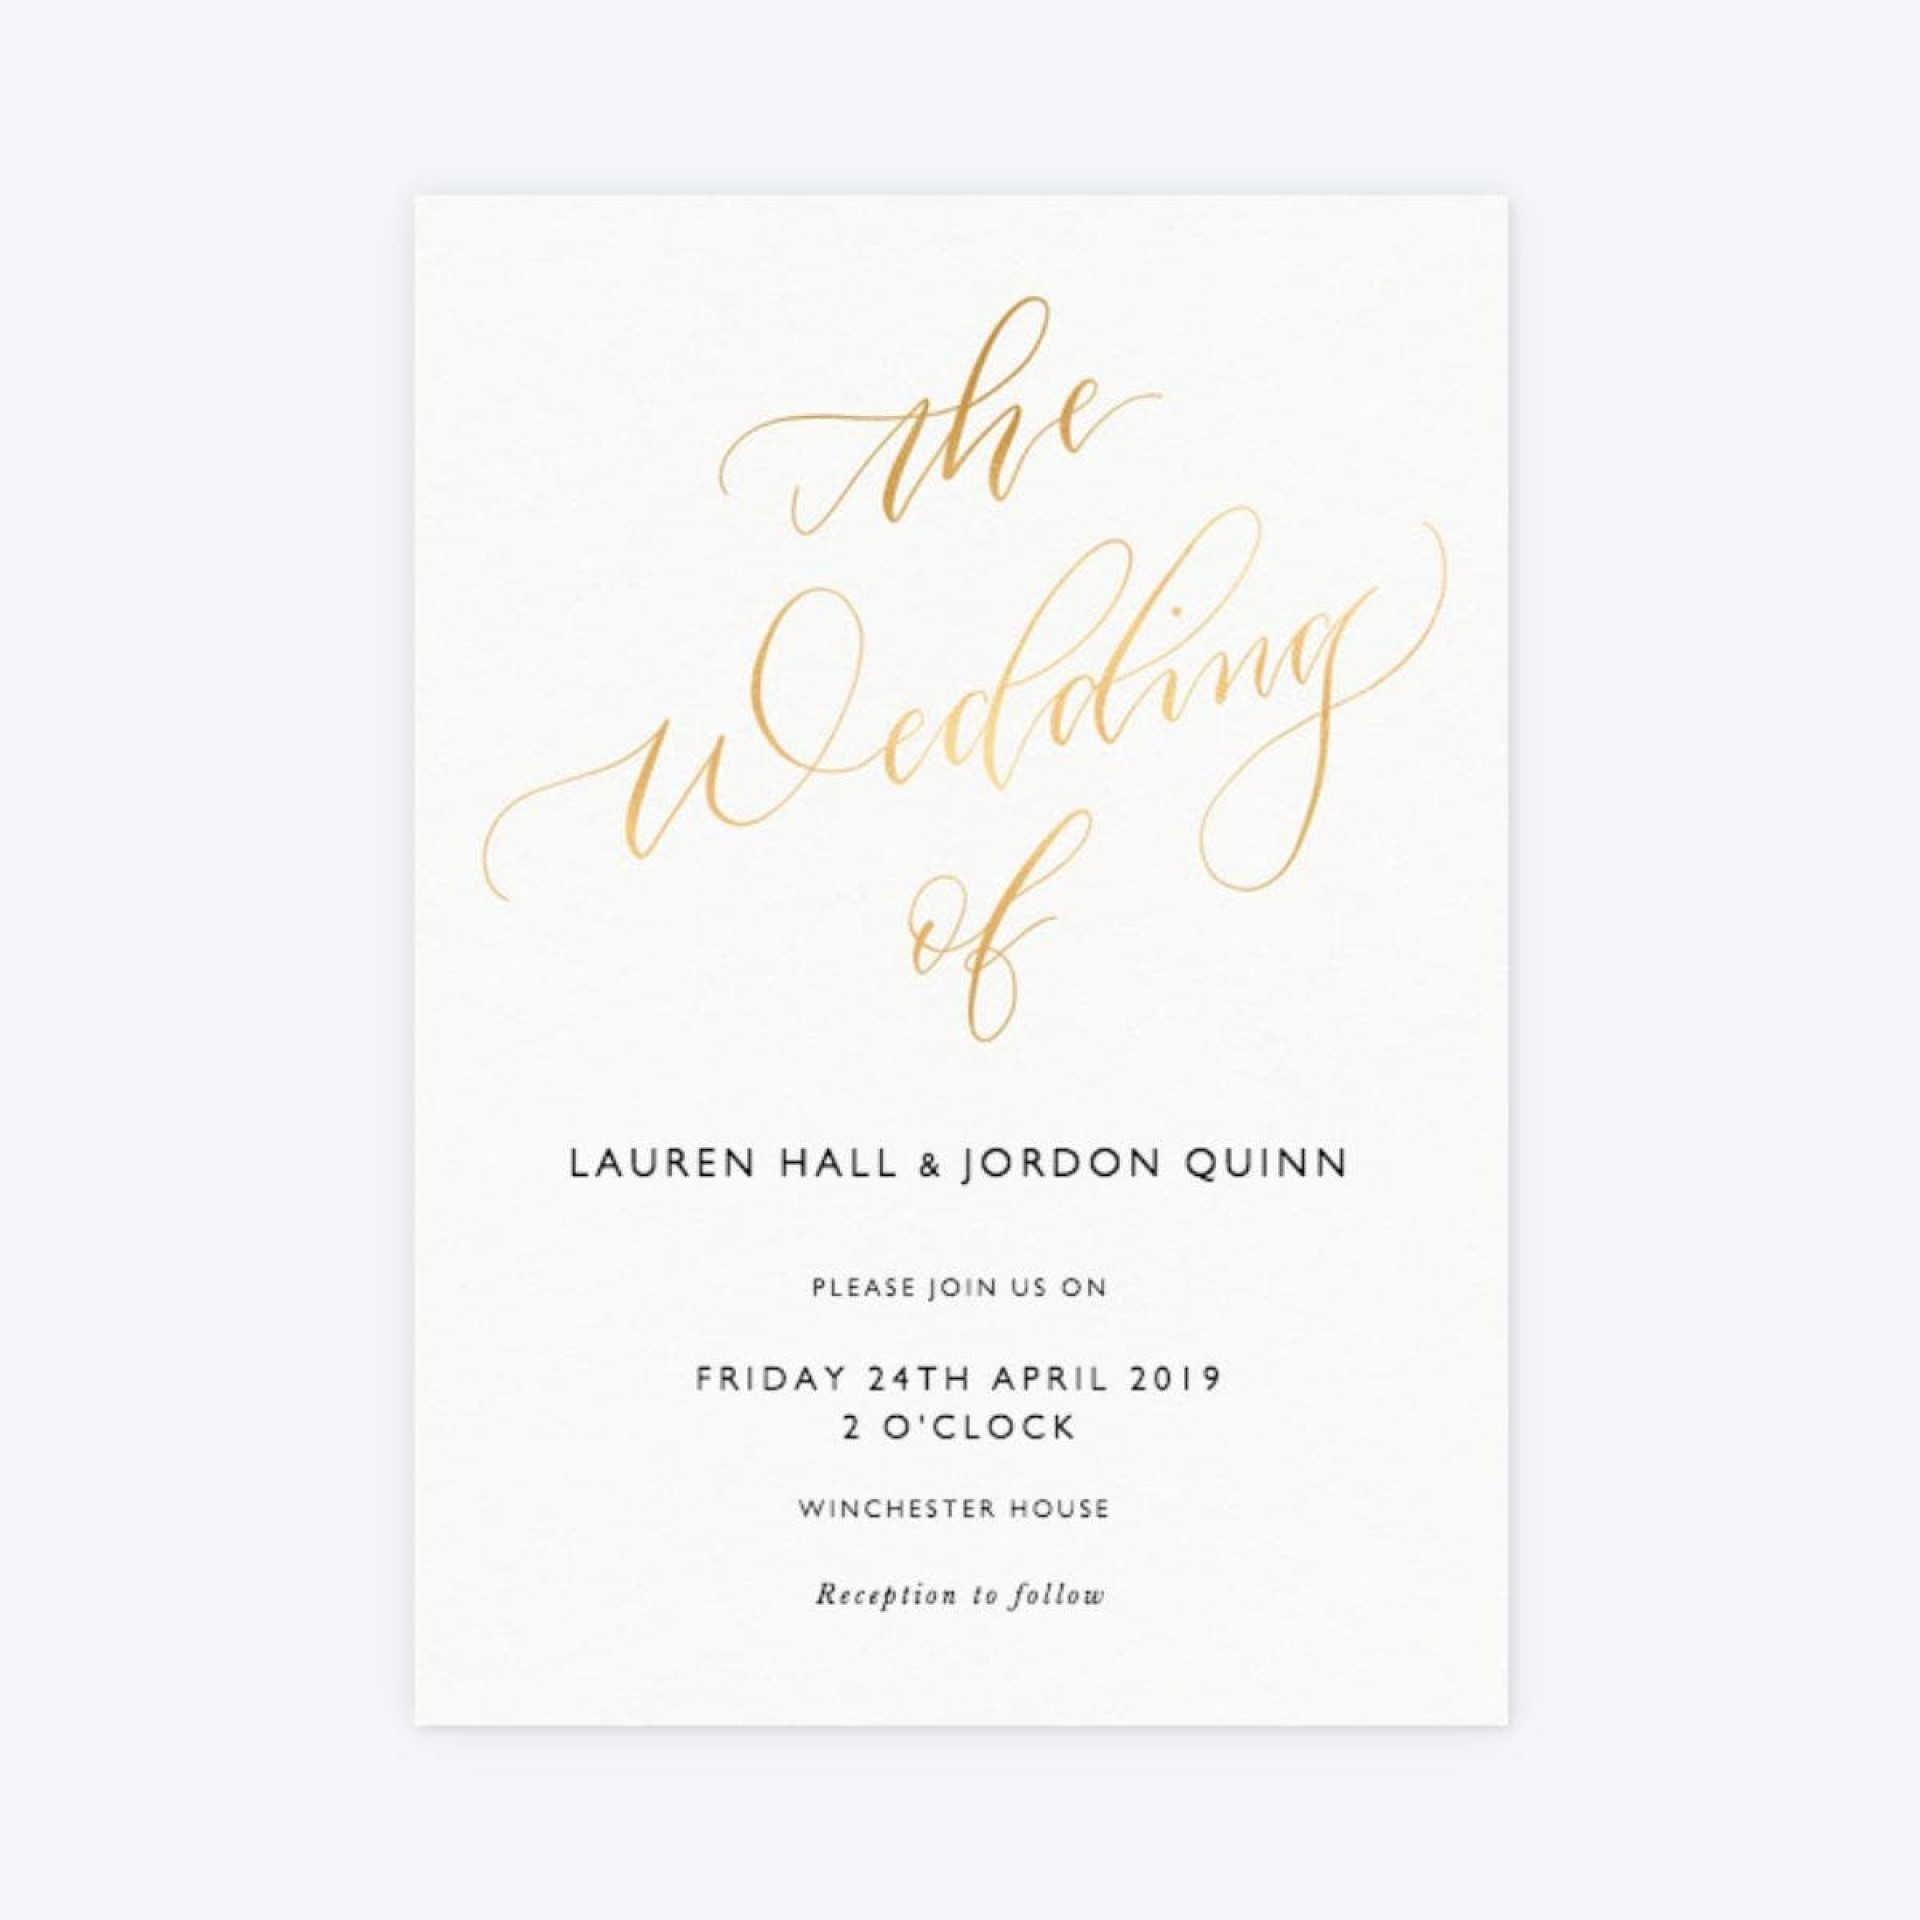 030 Wedding Registry Insert Card Template Ideas Outstanding With Regard To Wedding Hotel Information Card Template